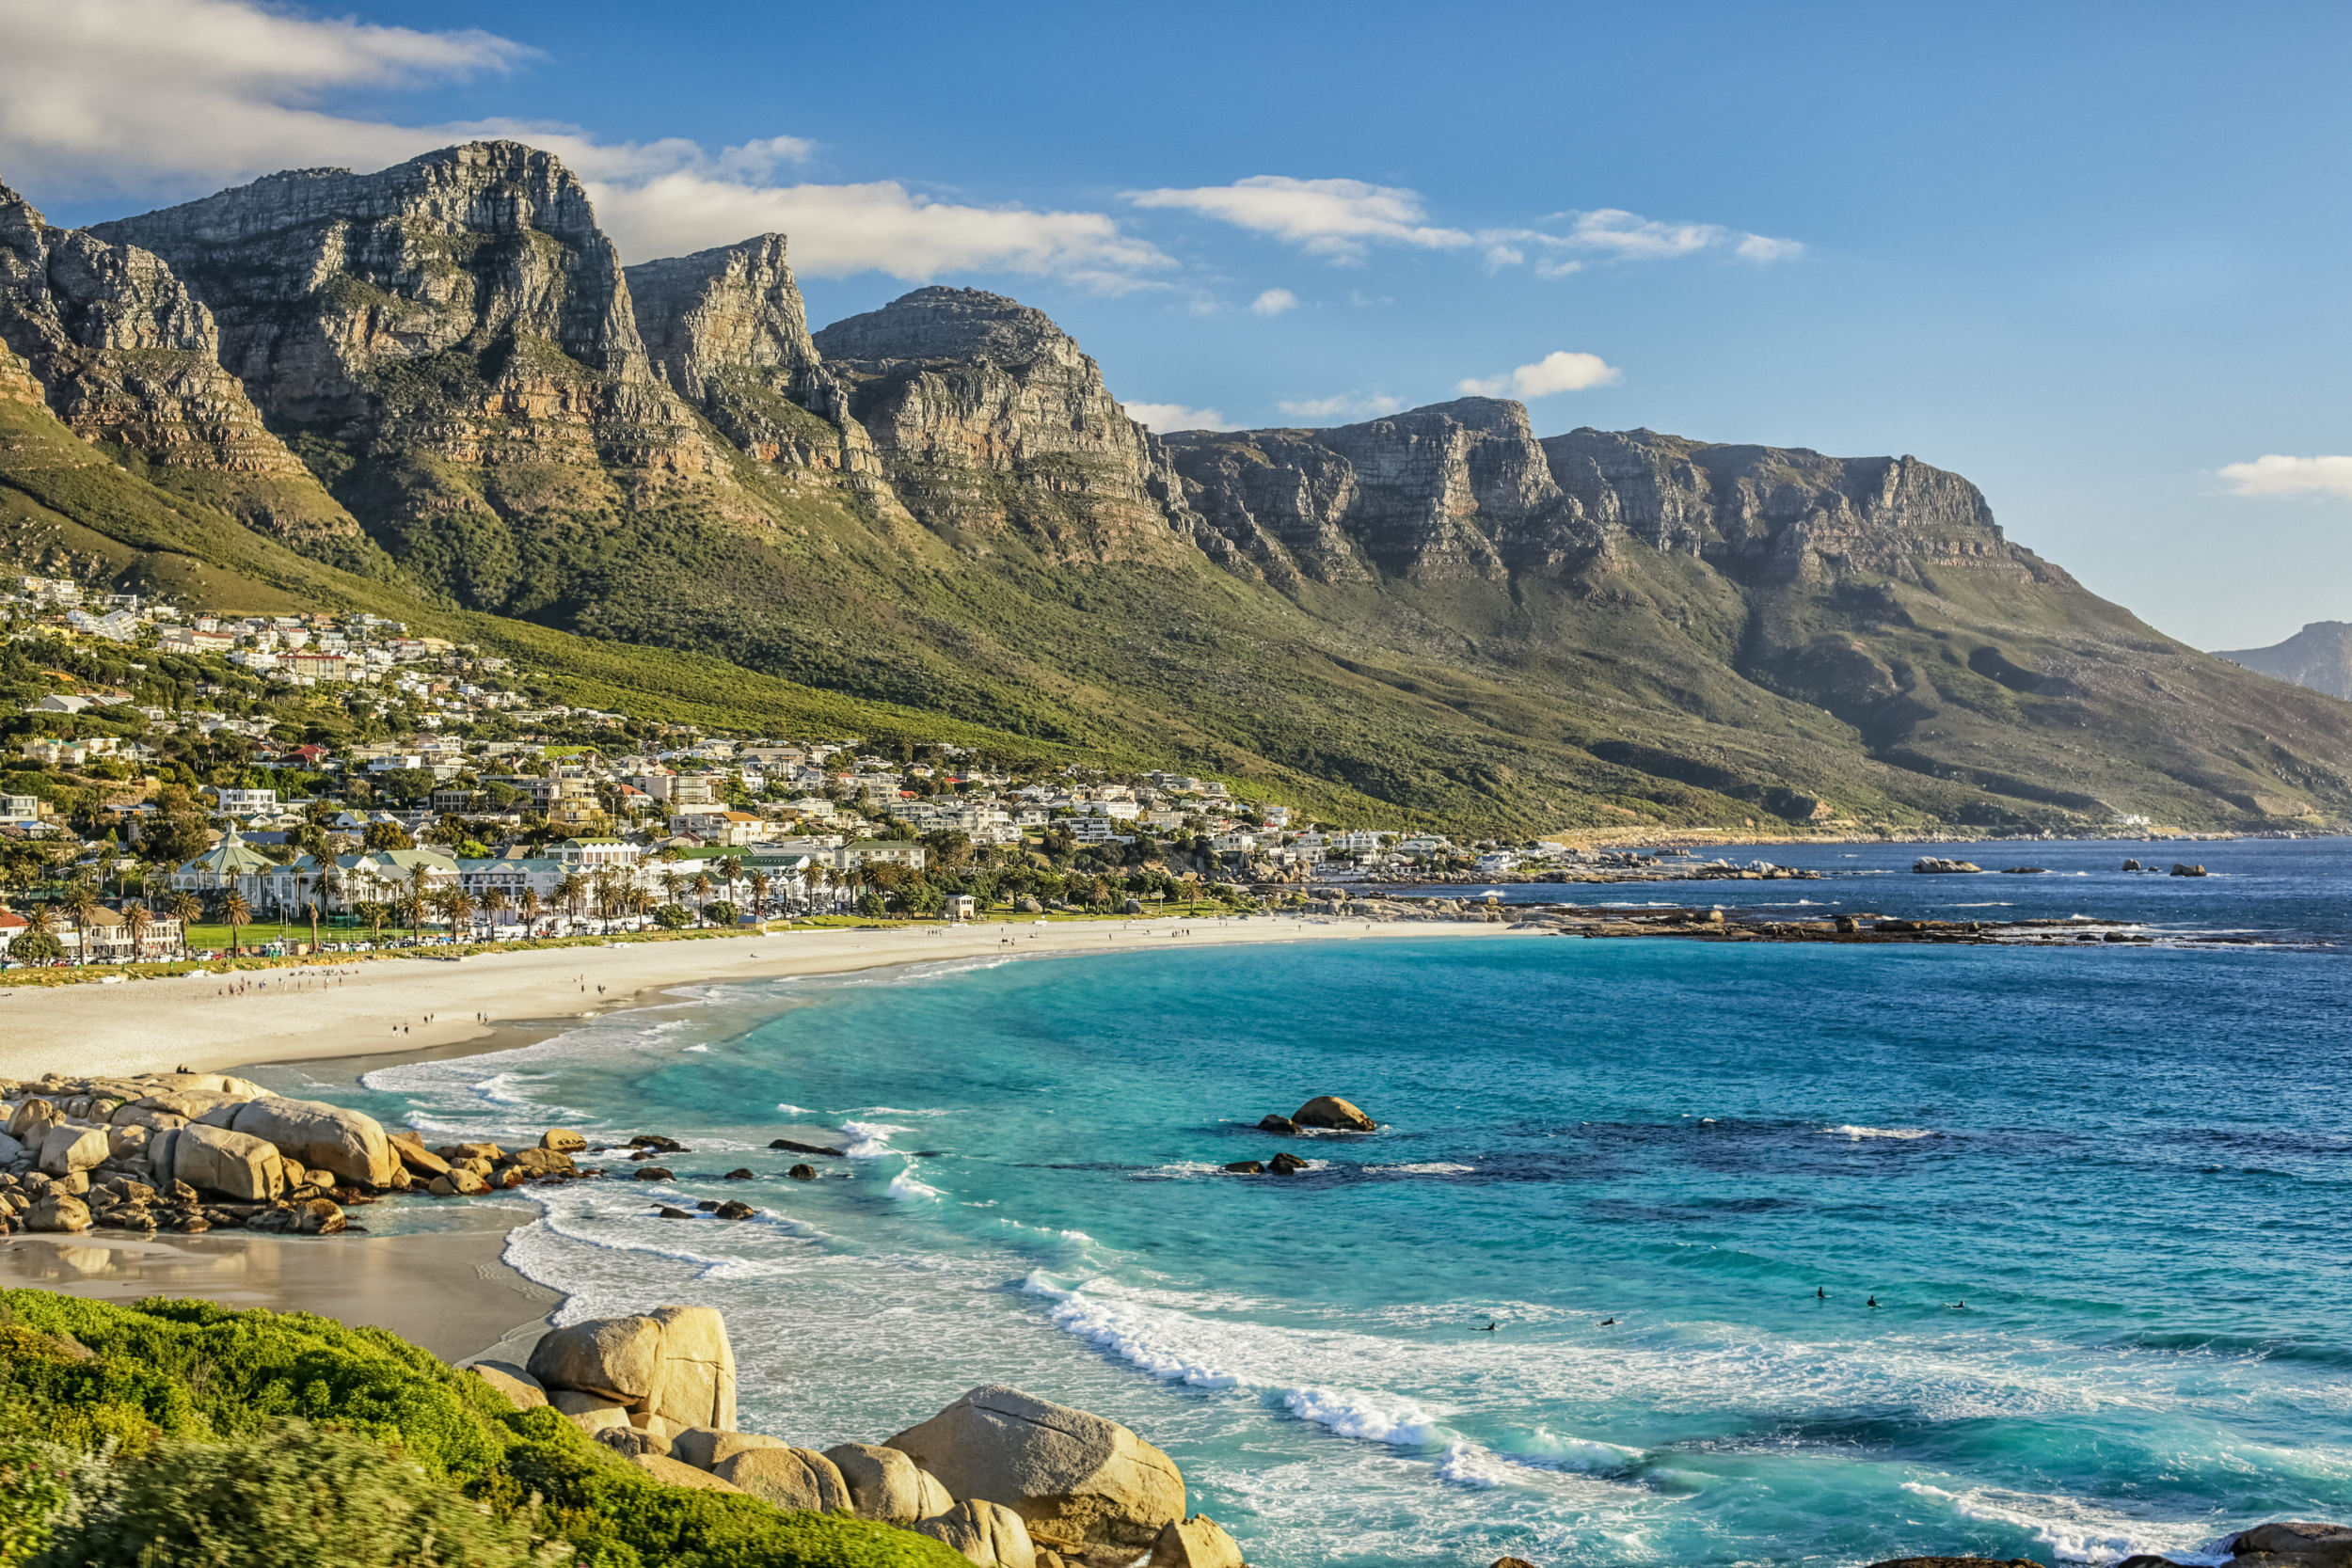 <p>Cape Town is fantastic no matter when you choose to visit, but you’ll appreciate the beaches, wineries, and sun even more in the colder months. Flying in from a cold northern hemisphere winter to a South African summer will immediately boost your mood.</p><p><a href='https://www.msn.com/en-us/community/channel/vid-cj9pqbr0vn9in2b6ddcd8sfgpfq6x6utp44fssrv6mc2gtybw0us'>Follow us on MSN to see more of our exclusive lifestyle content.</a></p>